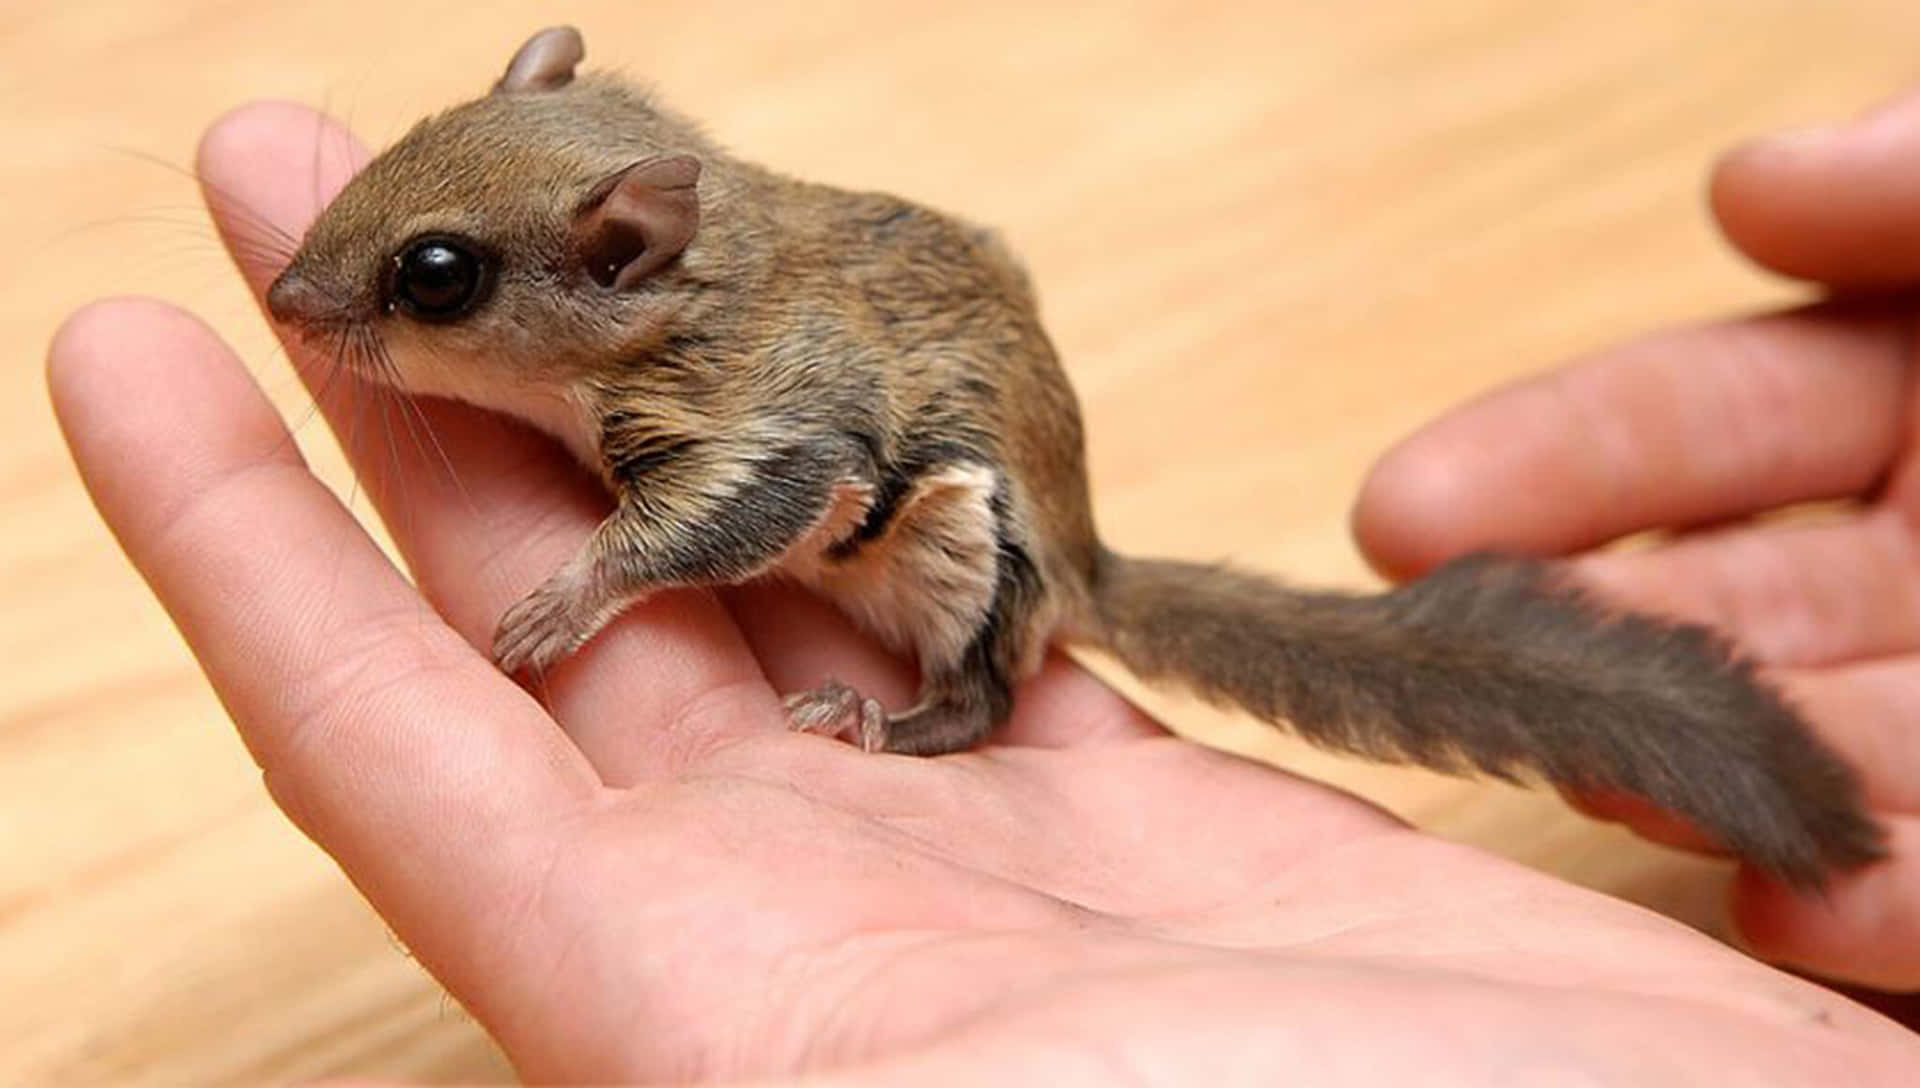 A Small Squirrel Is Being Held In Someone's Hand